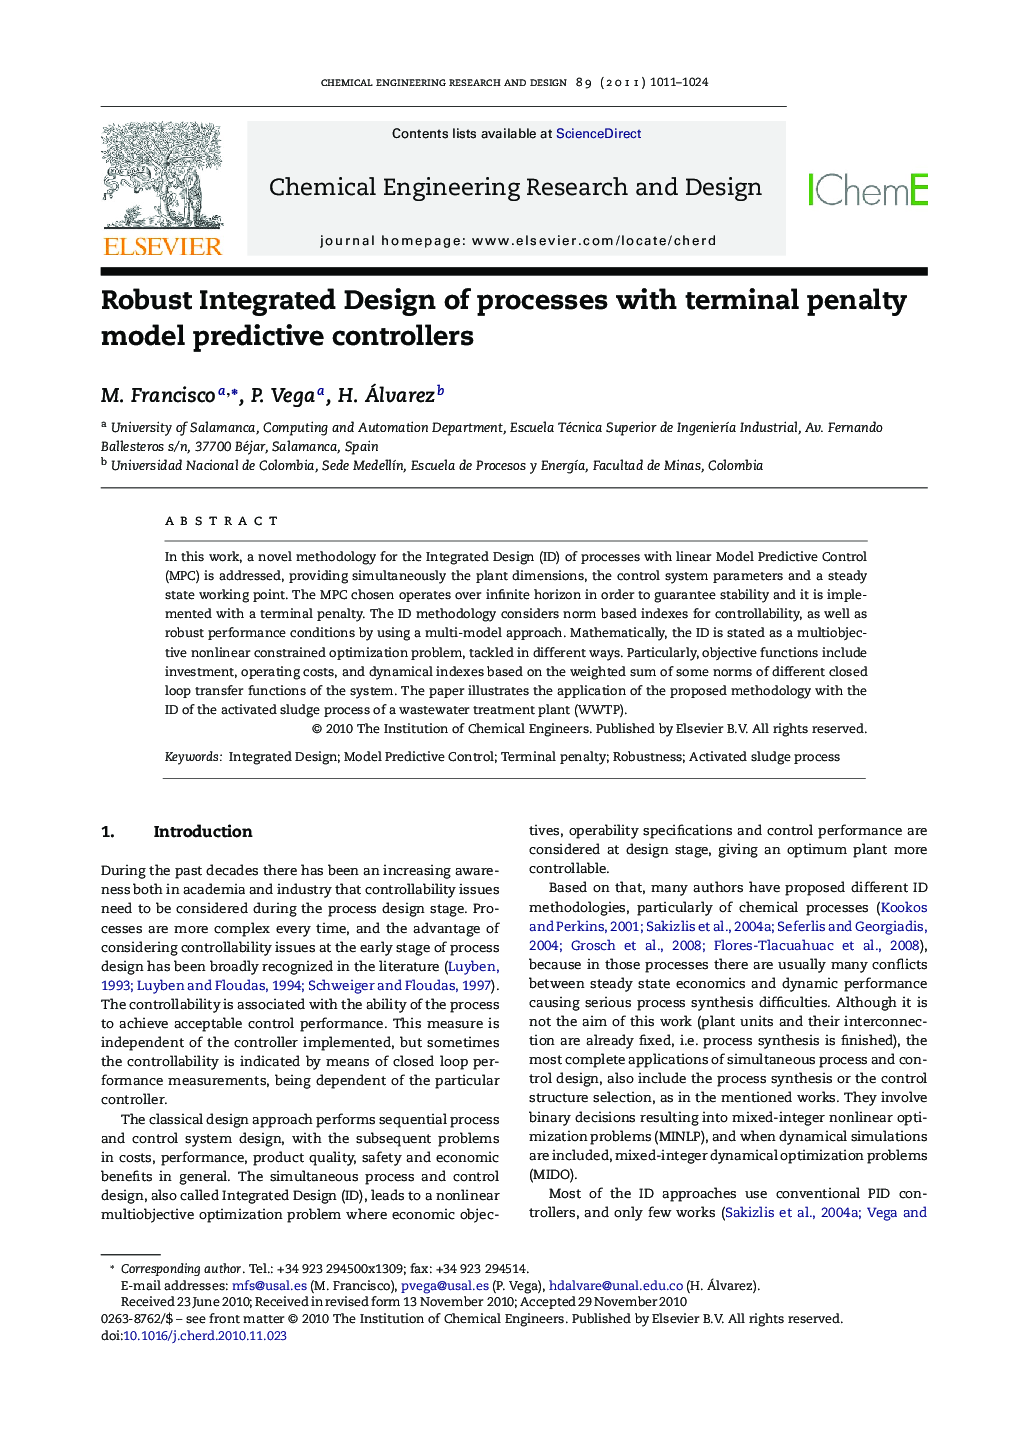 Robust Integrated Design of processes with terminal penalty model predictive controllers